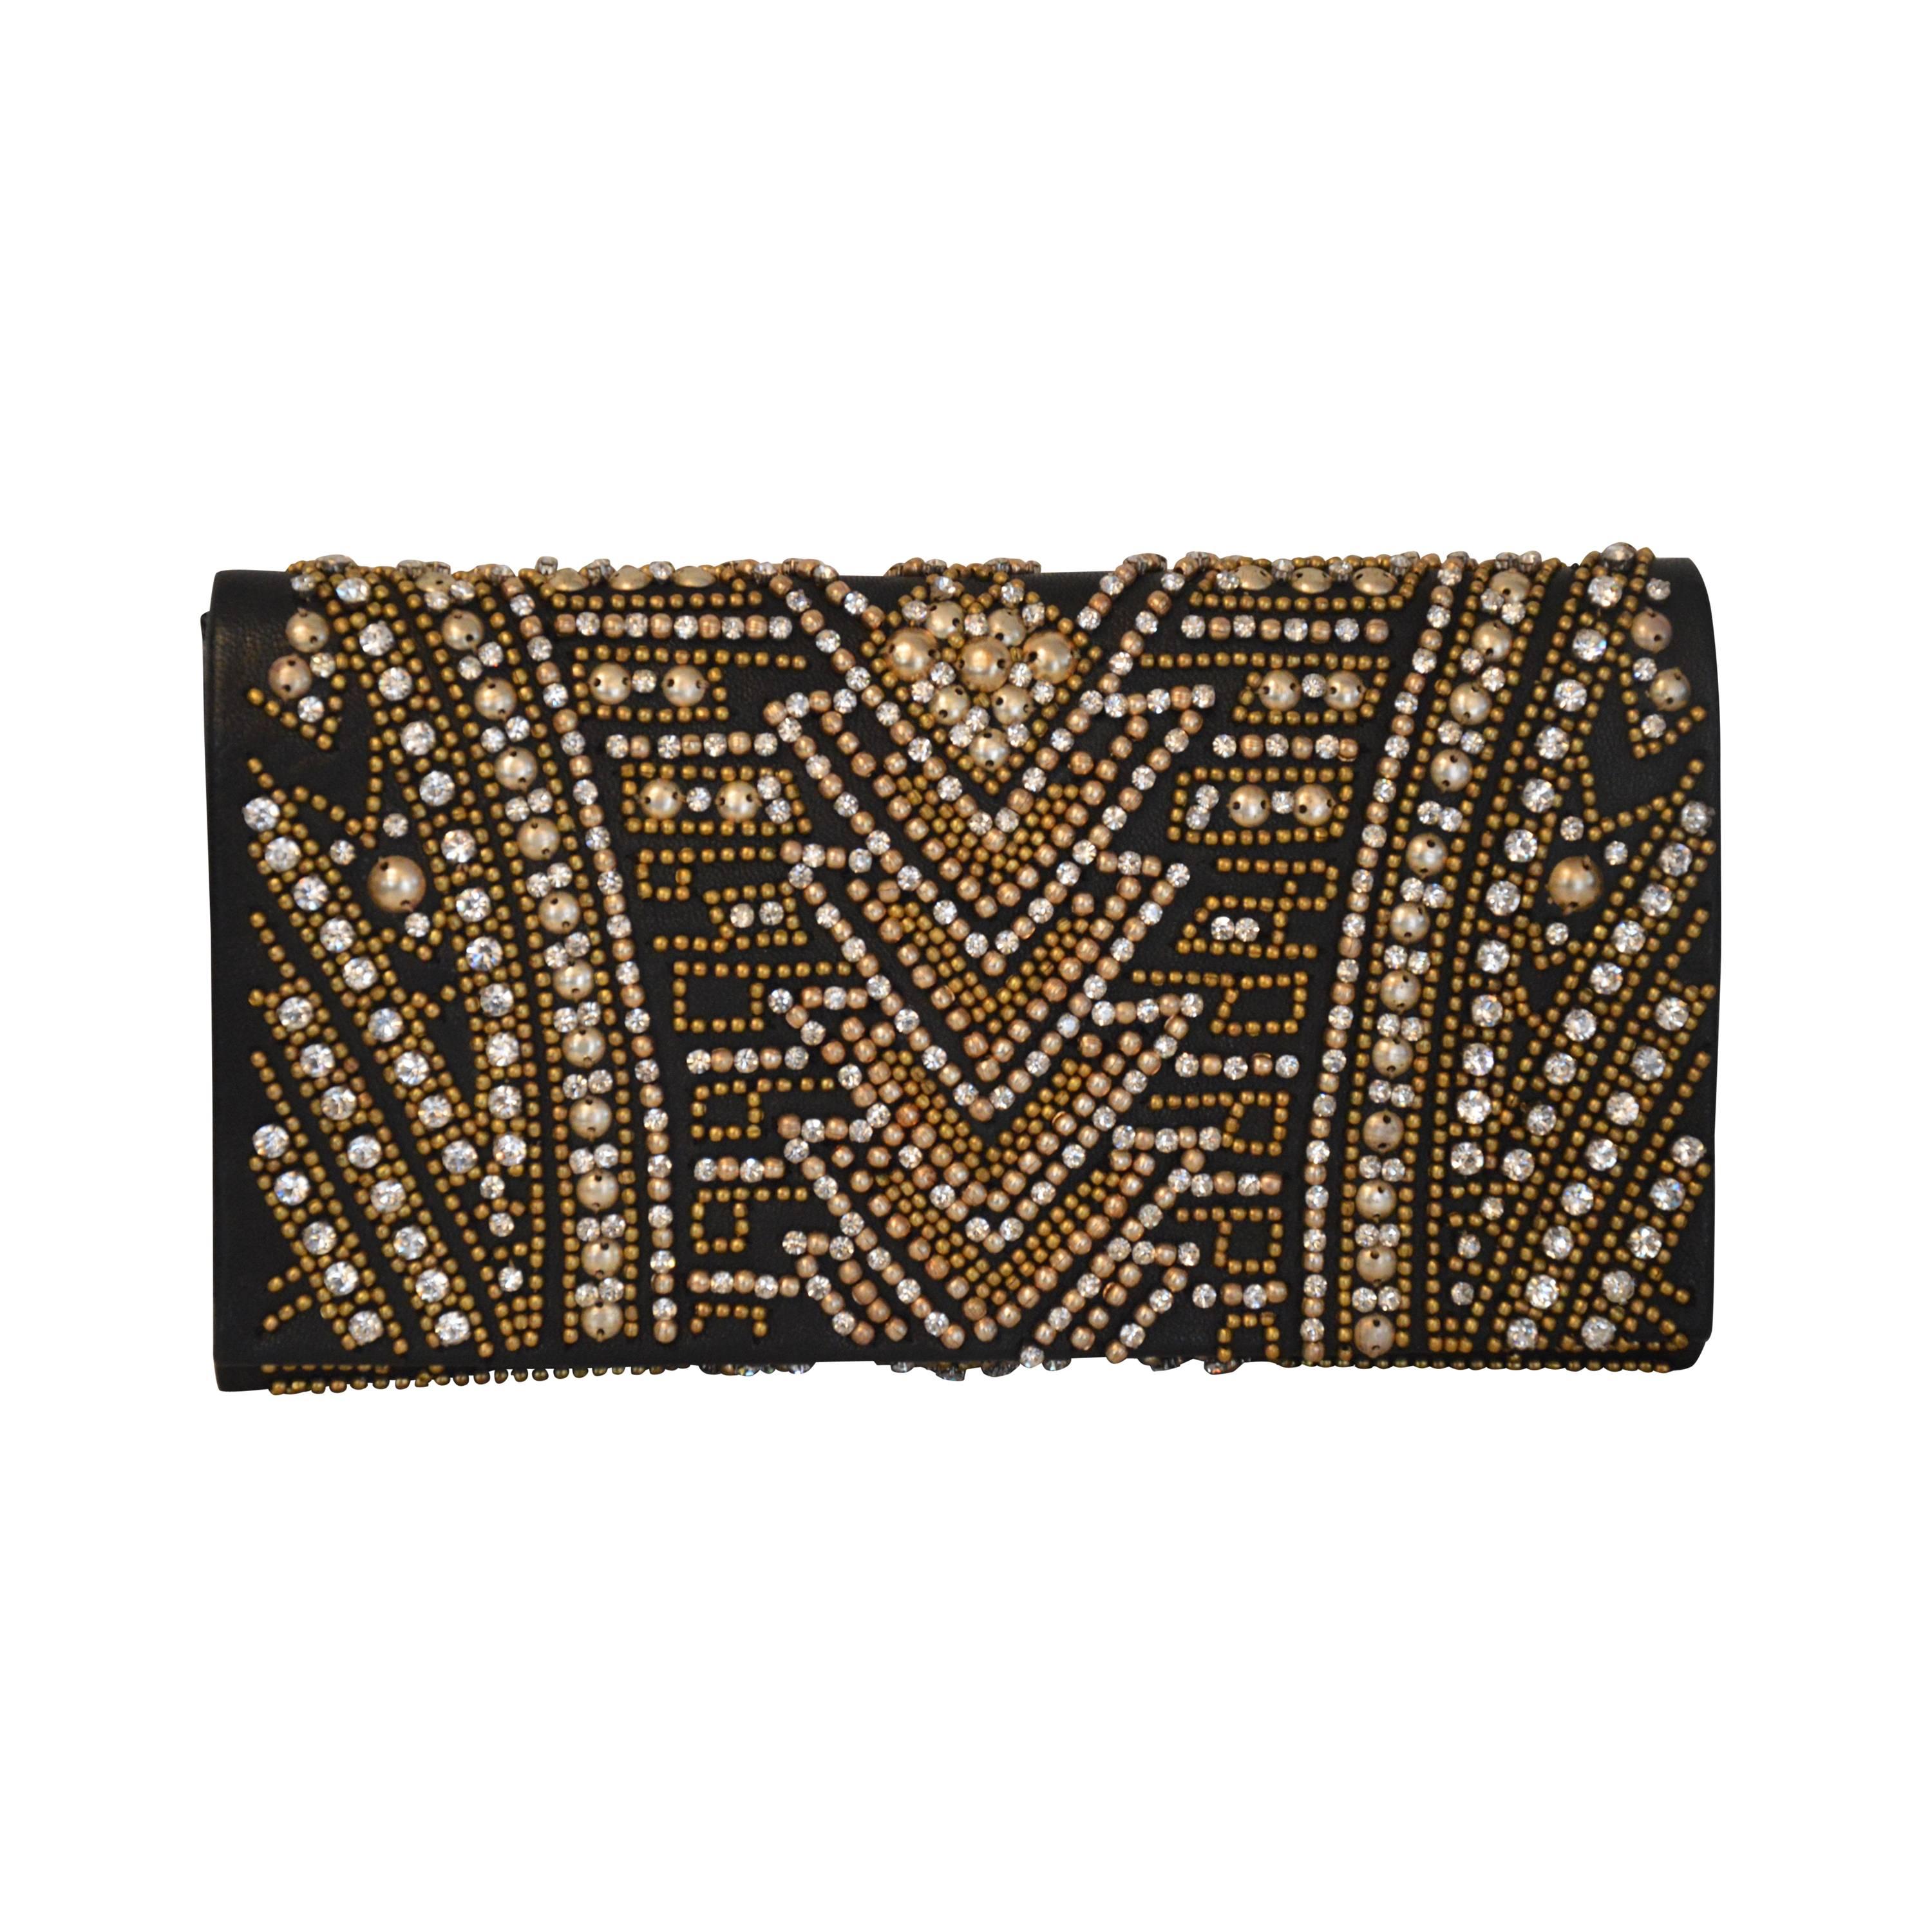 Rare Olivier Rousteing for Balmain Black Embroidered Leather Clutch For Sale